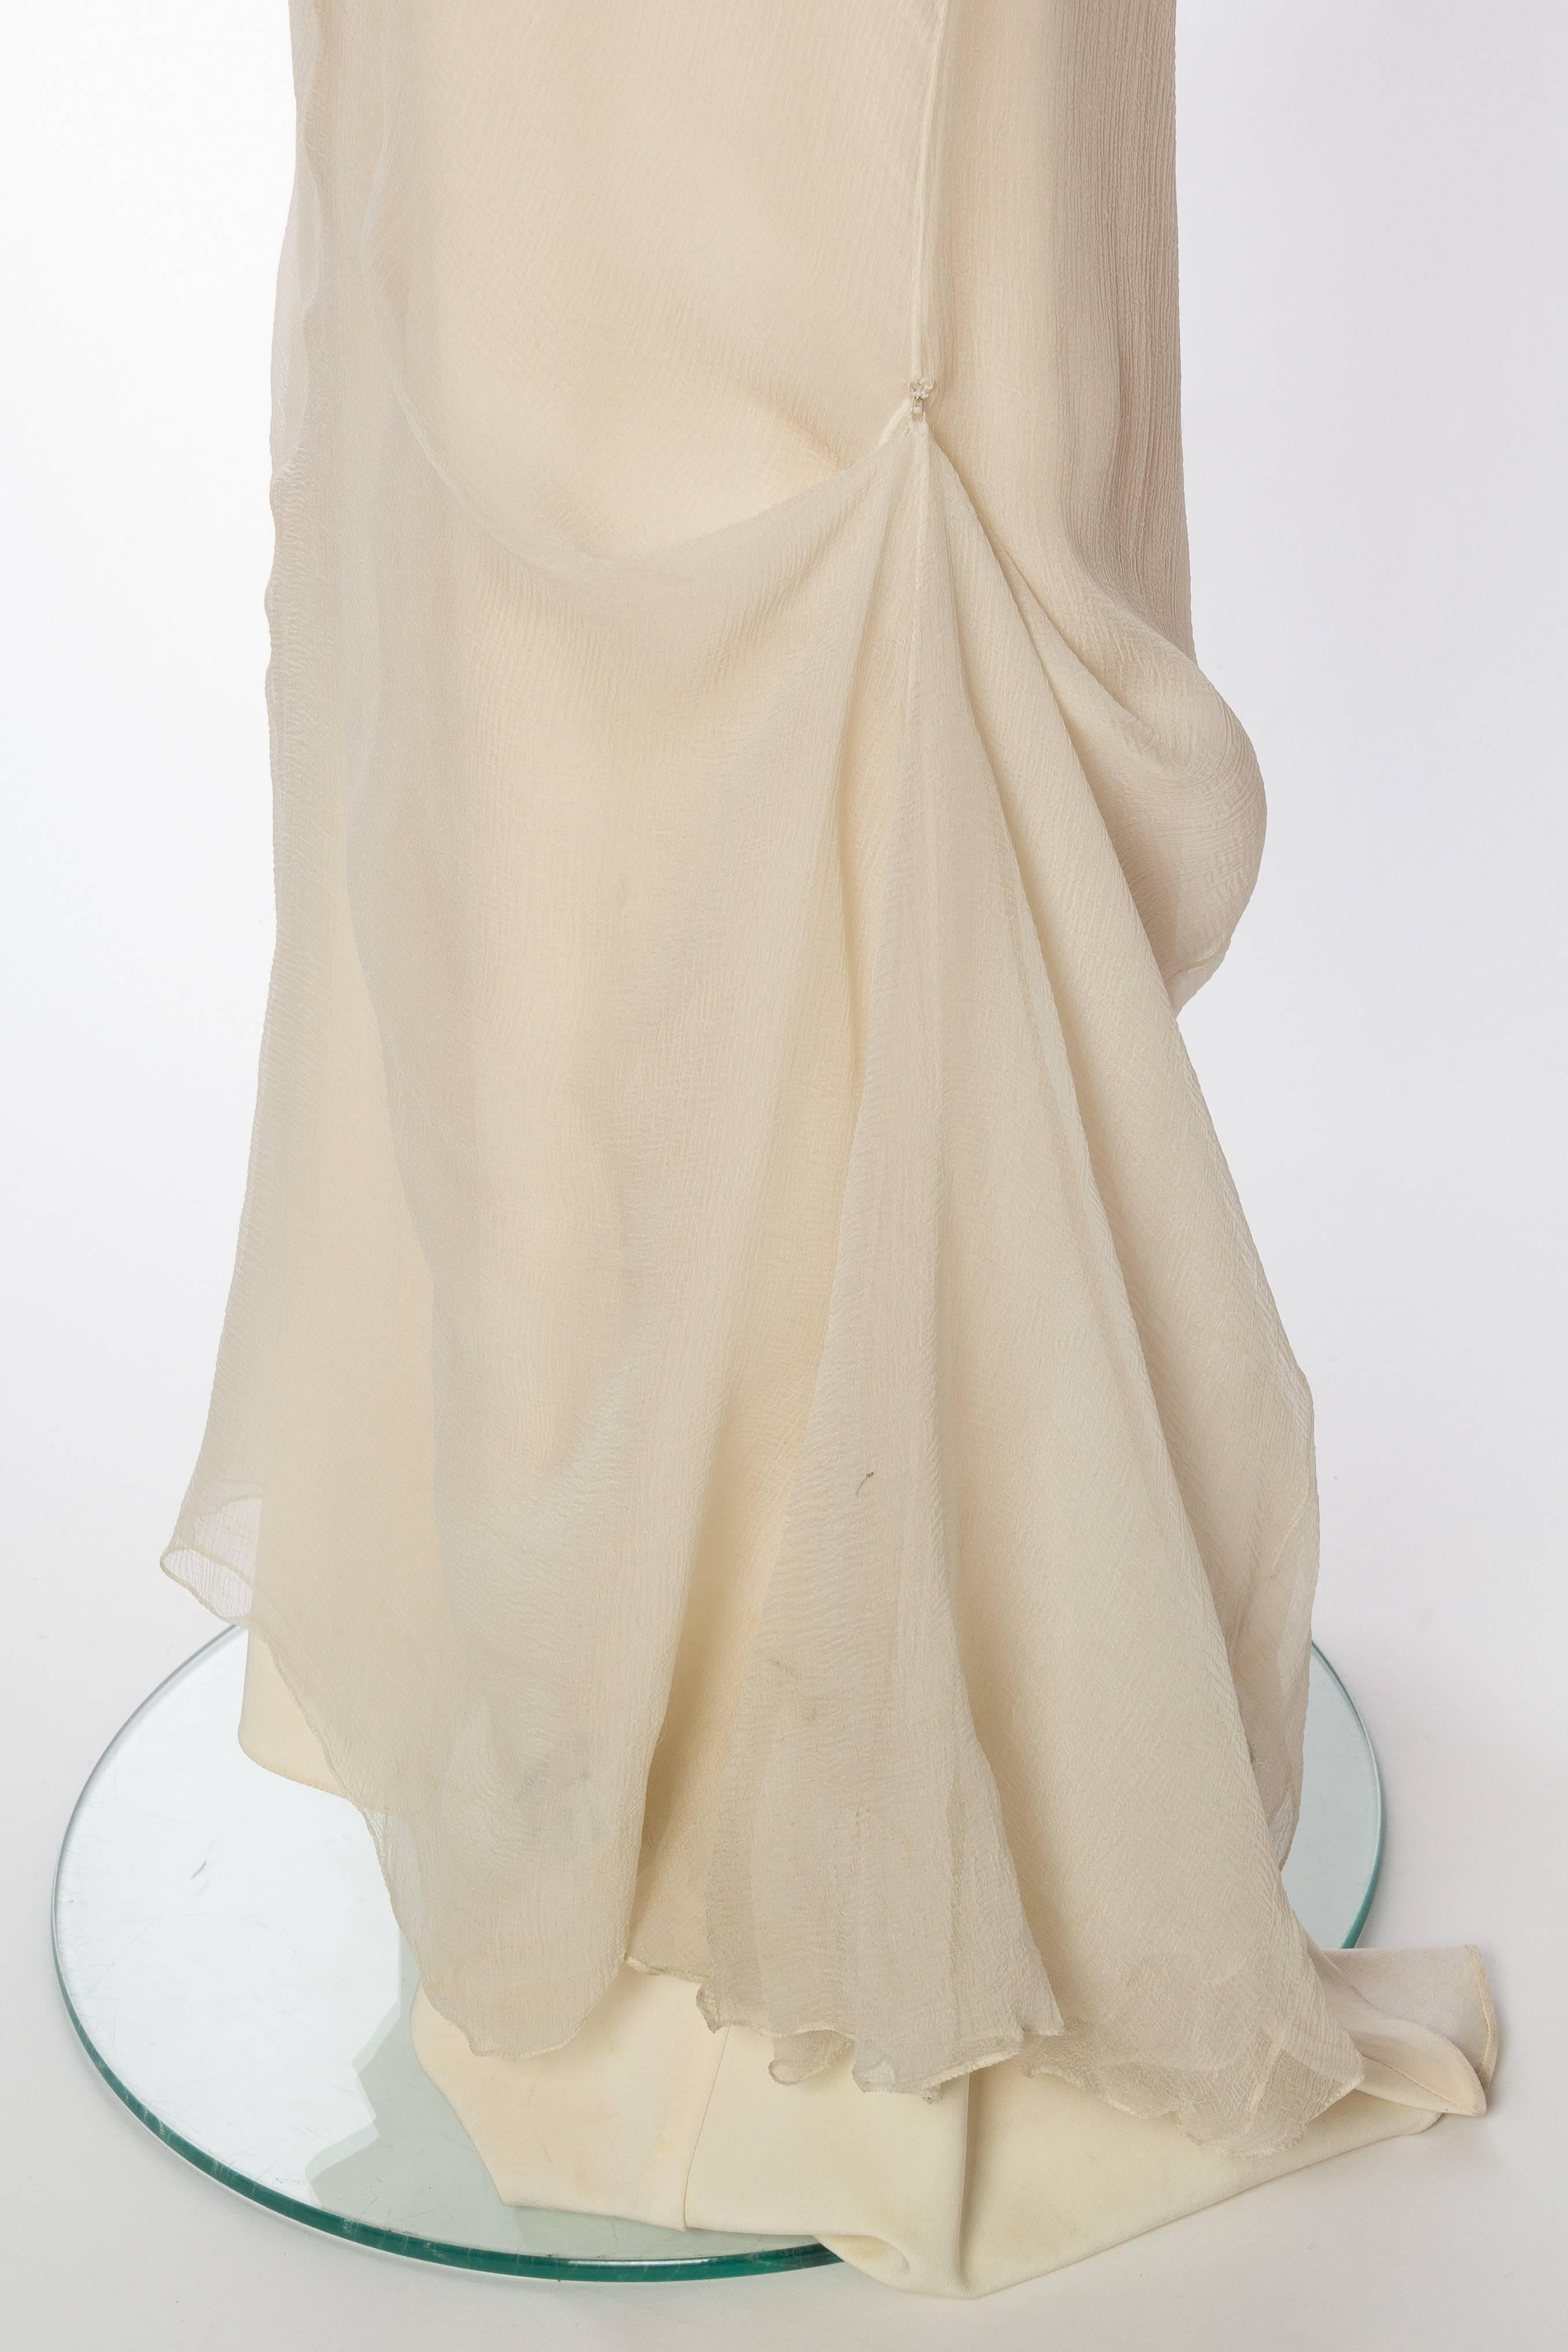 1990S DANES Ivory Silk Chiffon Bias Cut Backless 1930S Style Gown 2